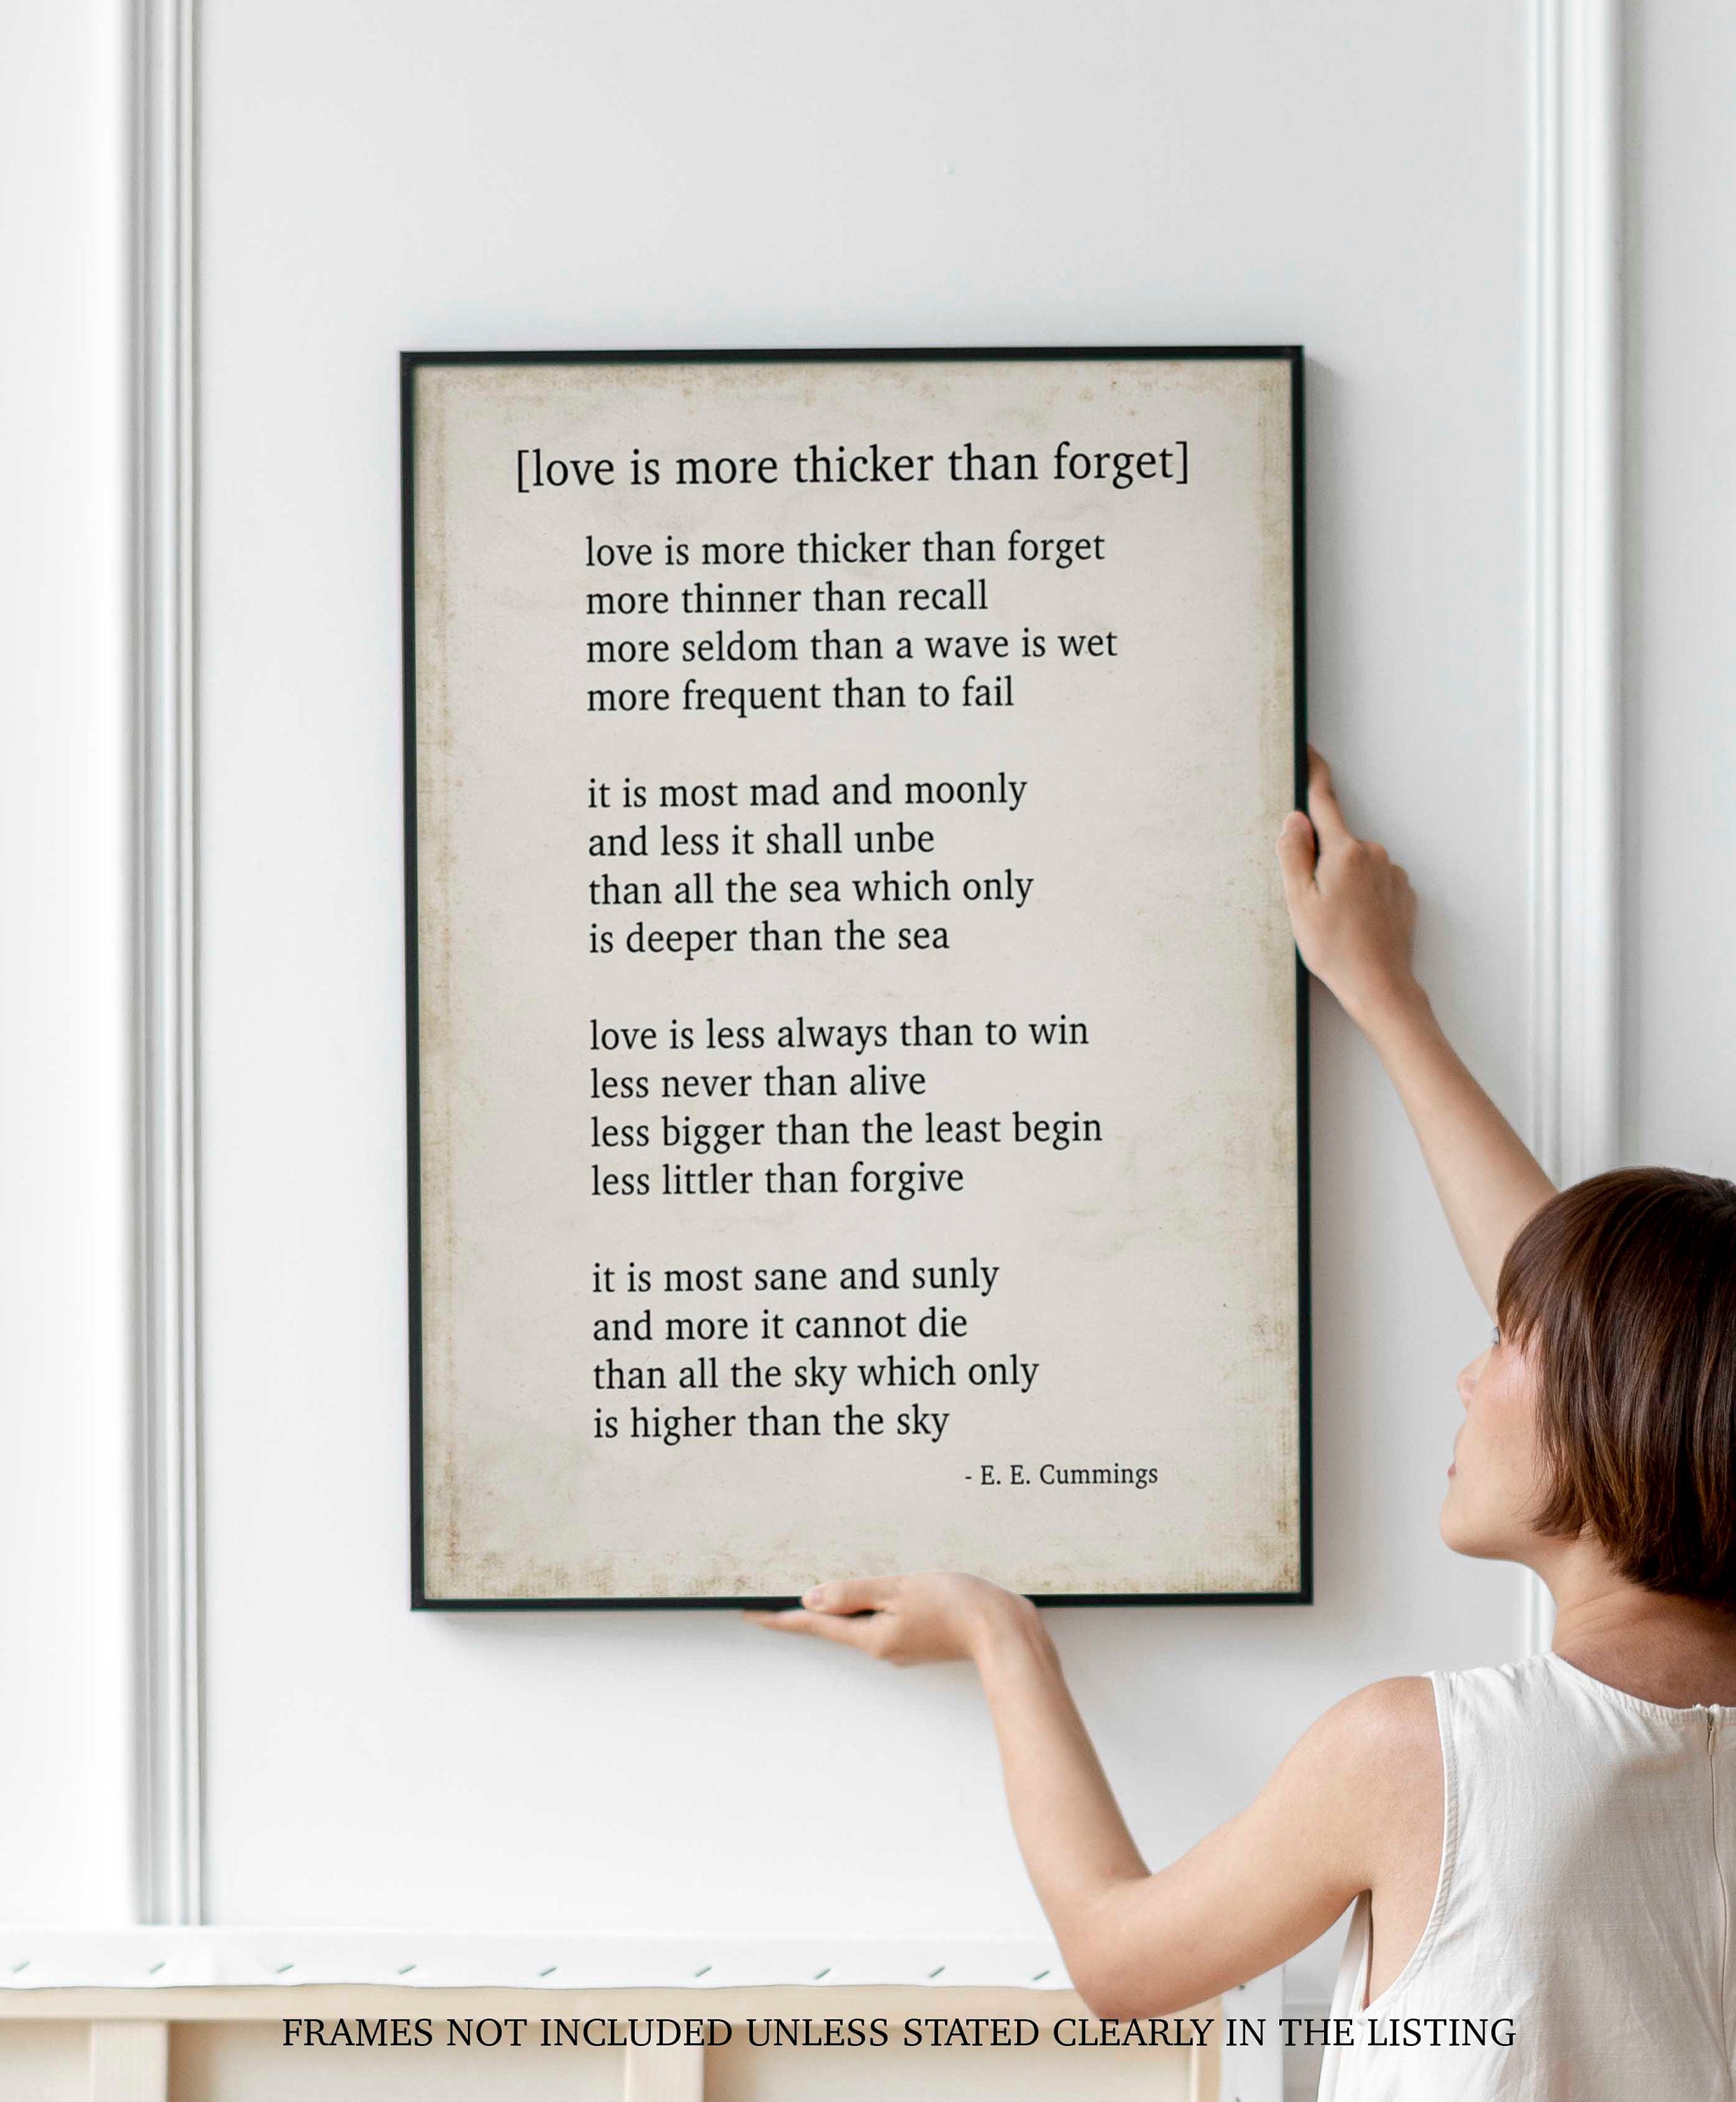 E E Cummings Love Poem Print, Love Is More Thicker Than Forget - Poetry Quote Art Unframed in Vintage Style and Black & White